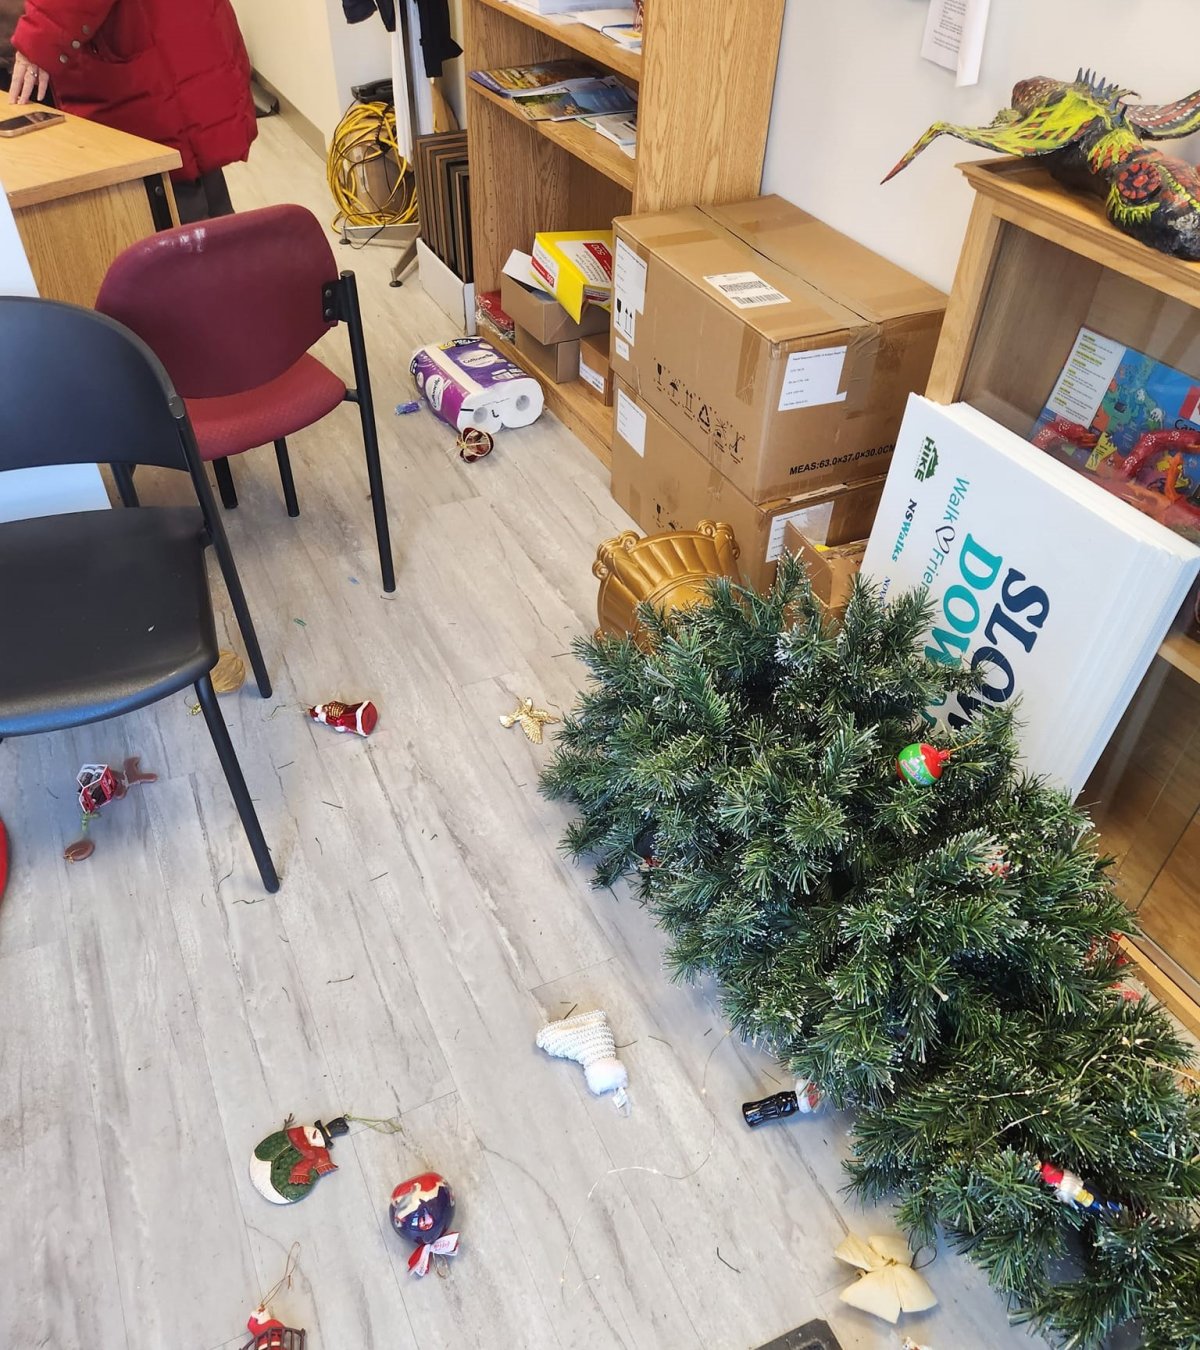 In a Facebook post from Nova Scotia Liberal MLA Brendan Maguire, a tree is shown knocked over as ornaments are scattered across the floor following an alleged assault at his constituency office.